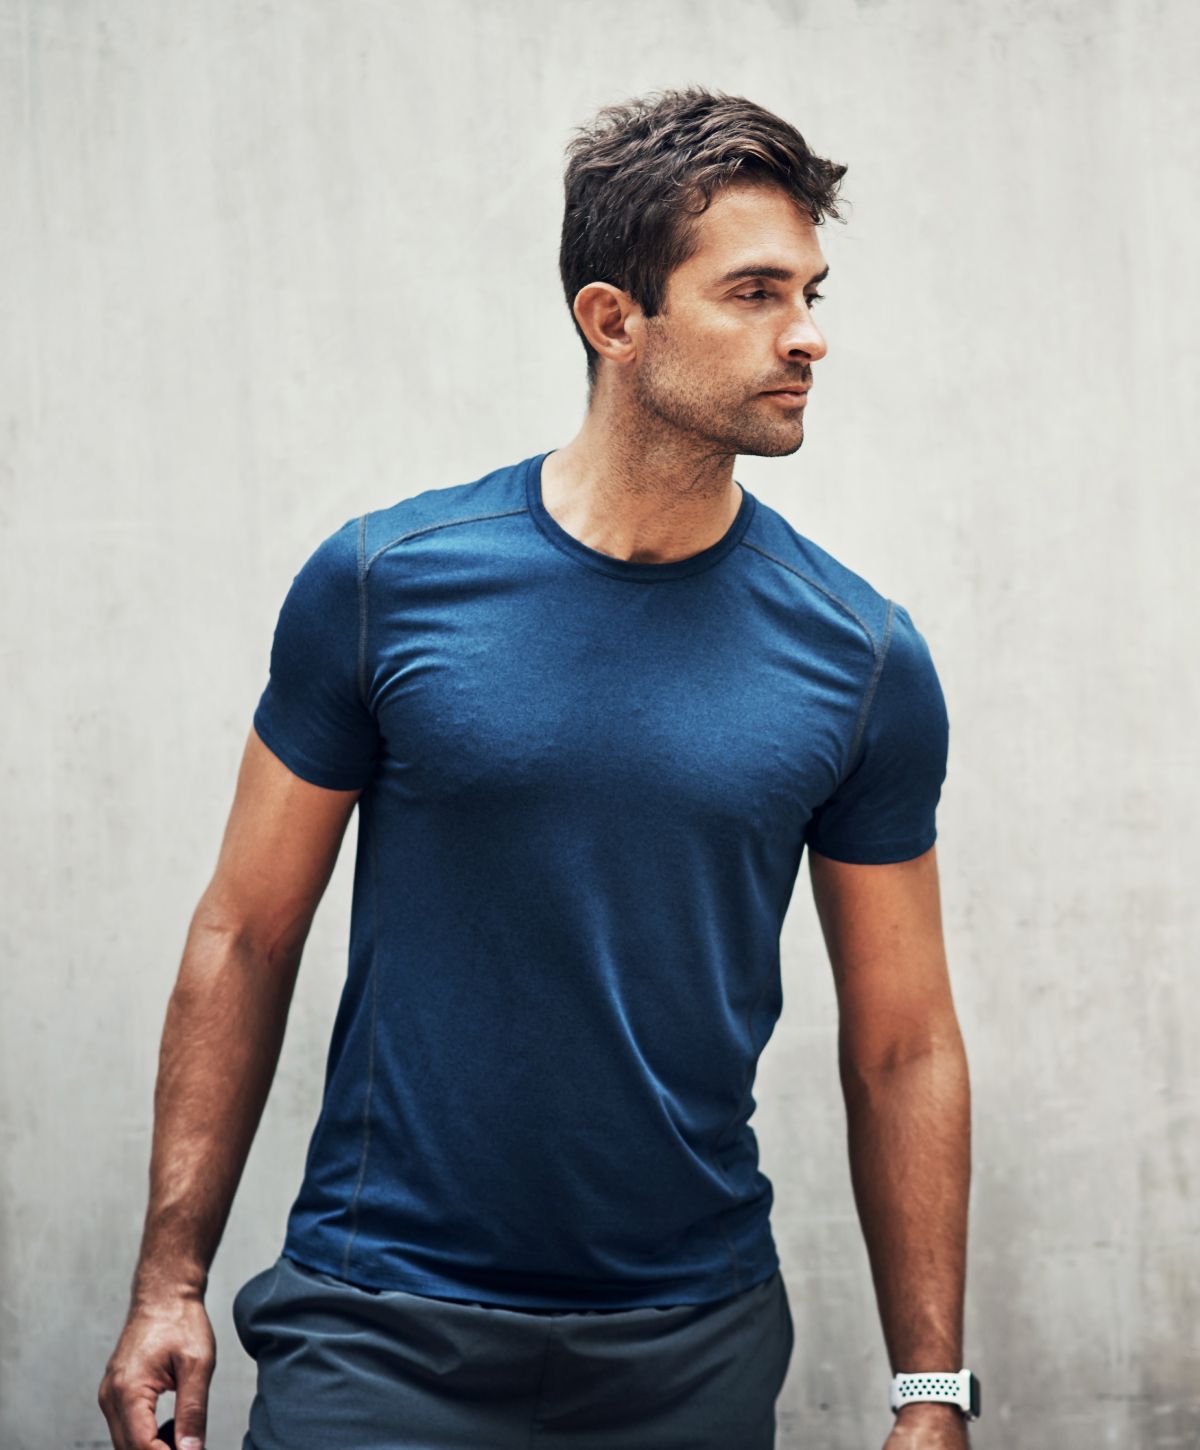 Franklin muscle toning model in blue shirt